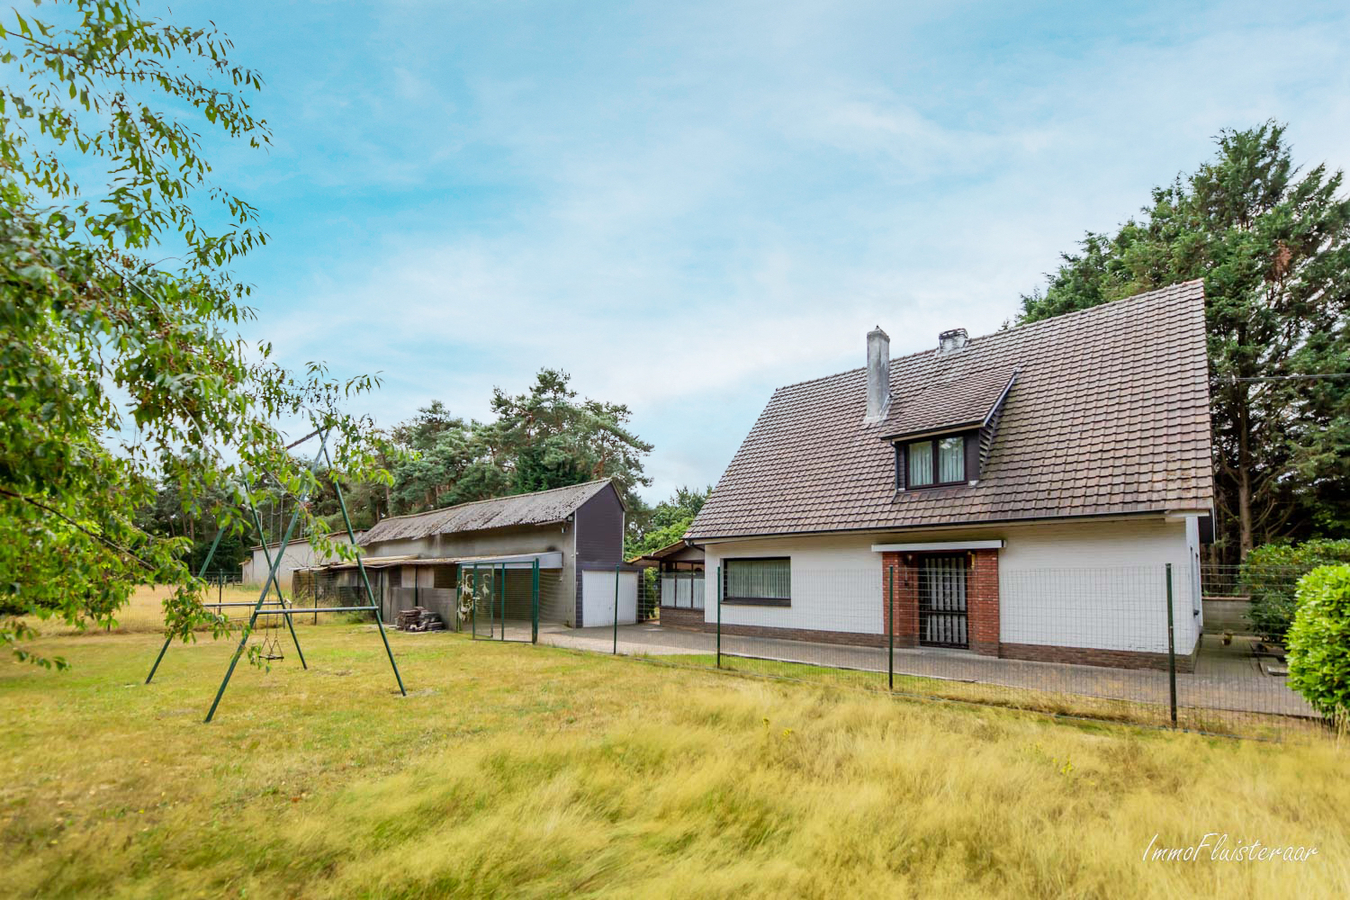 Property sold in Herentals